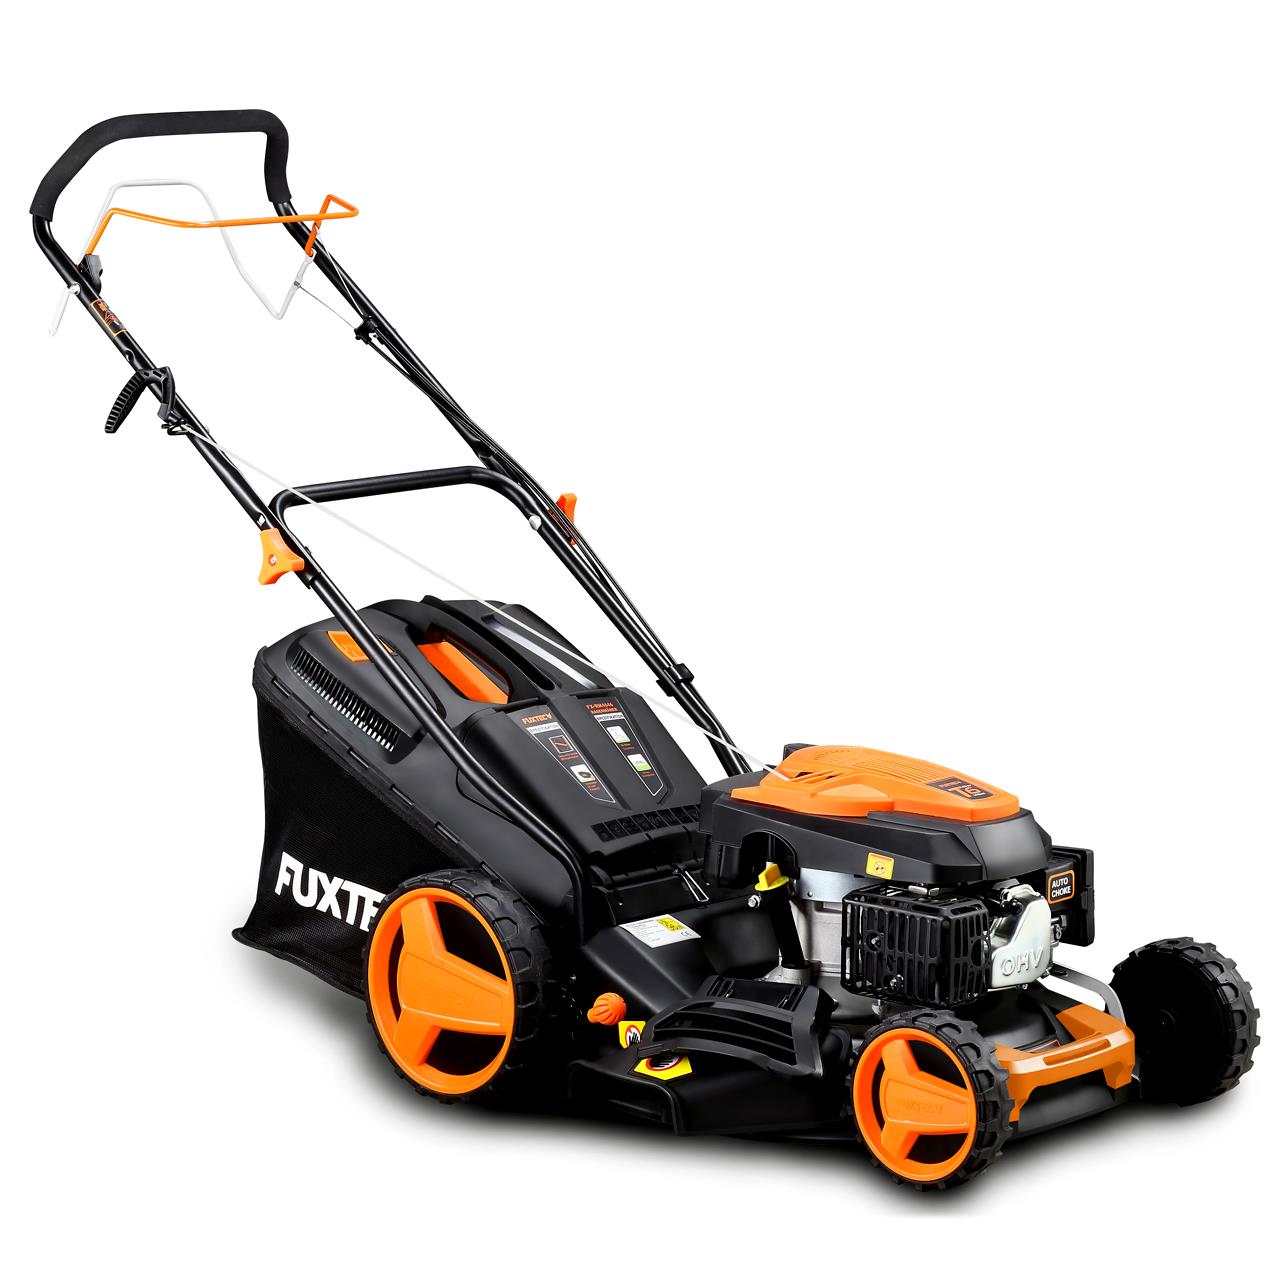 Petrol 146cc lawnmower 18inch cutting width -mowing,collecting,mulching,side discharge- FUXTEC RM4646